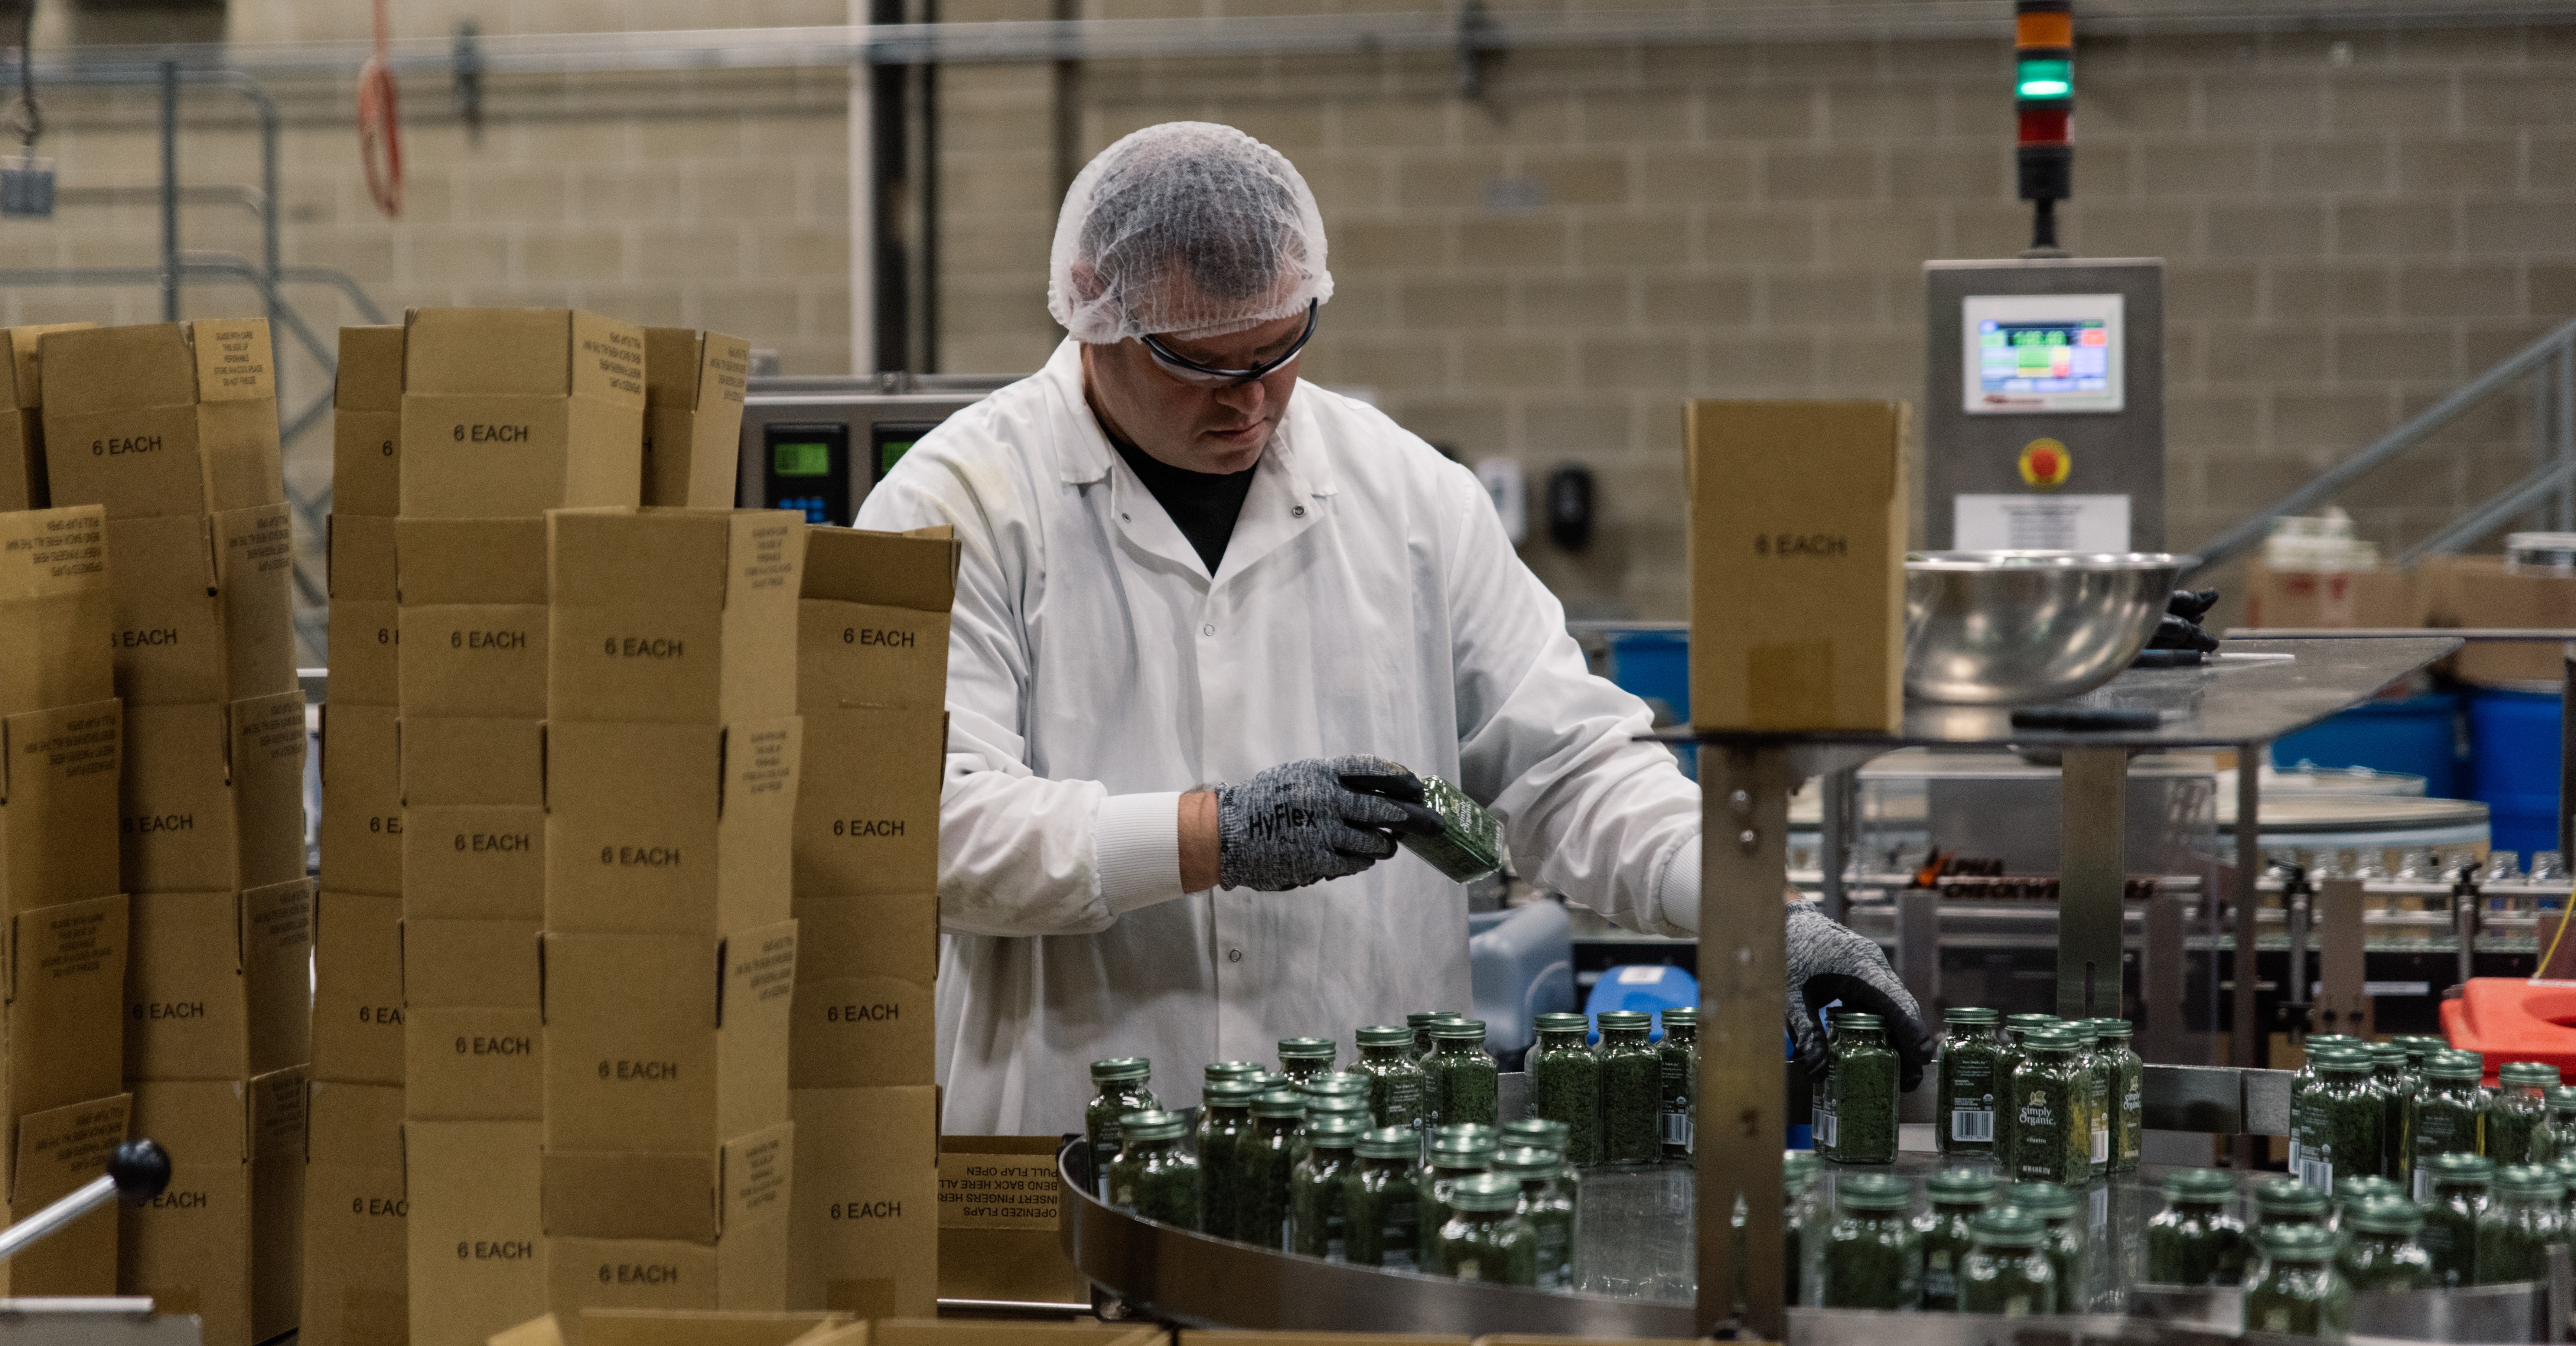 A man wearing a hair net and white lab coat checks spice jars for quality.